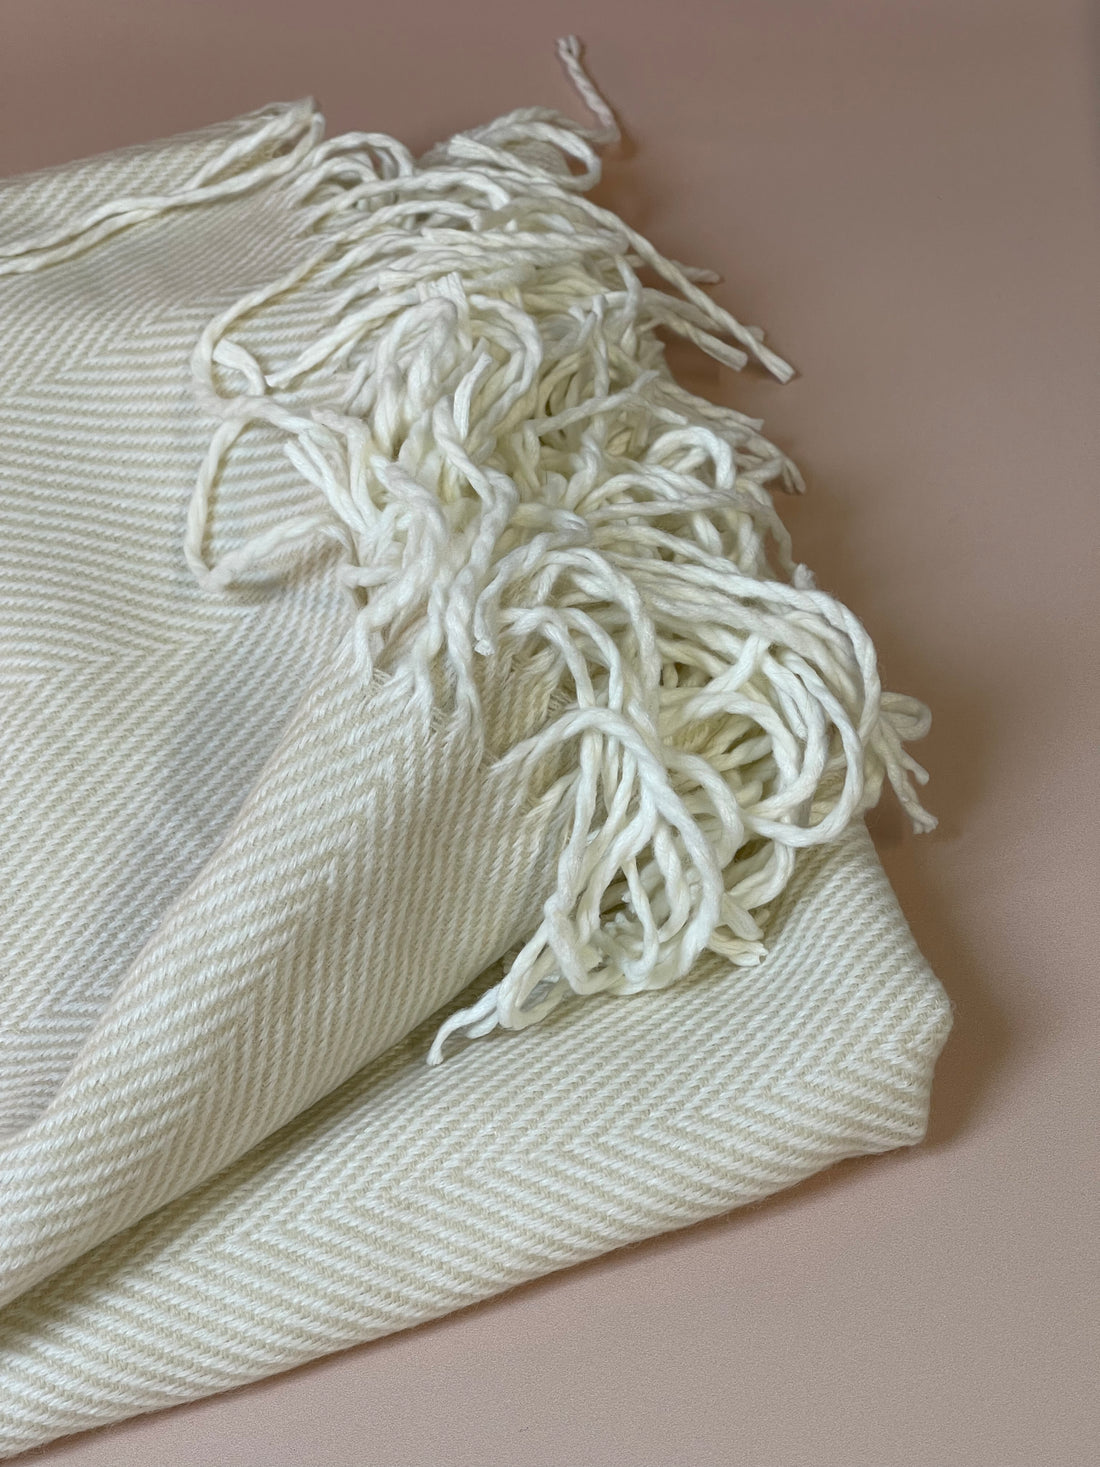 Soft cream throw blanket with textured weave, perfect for cozying up on chilly evenings or adding a touch of warmth to your decor.